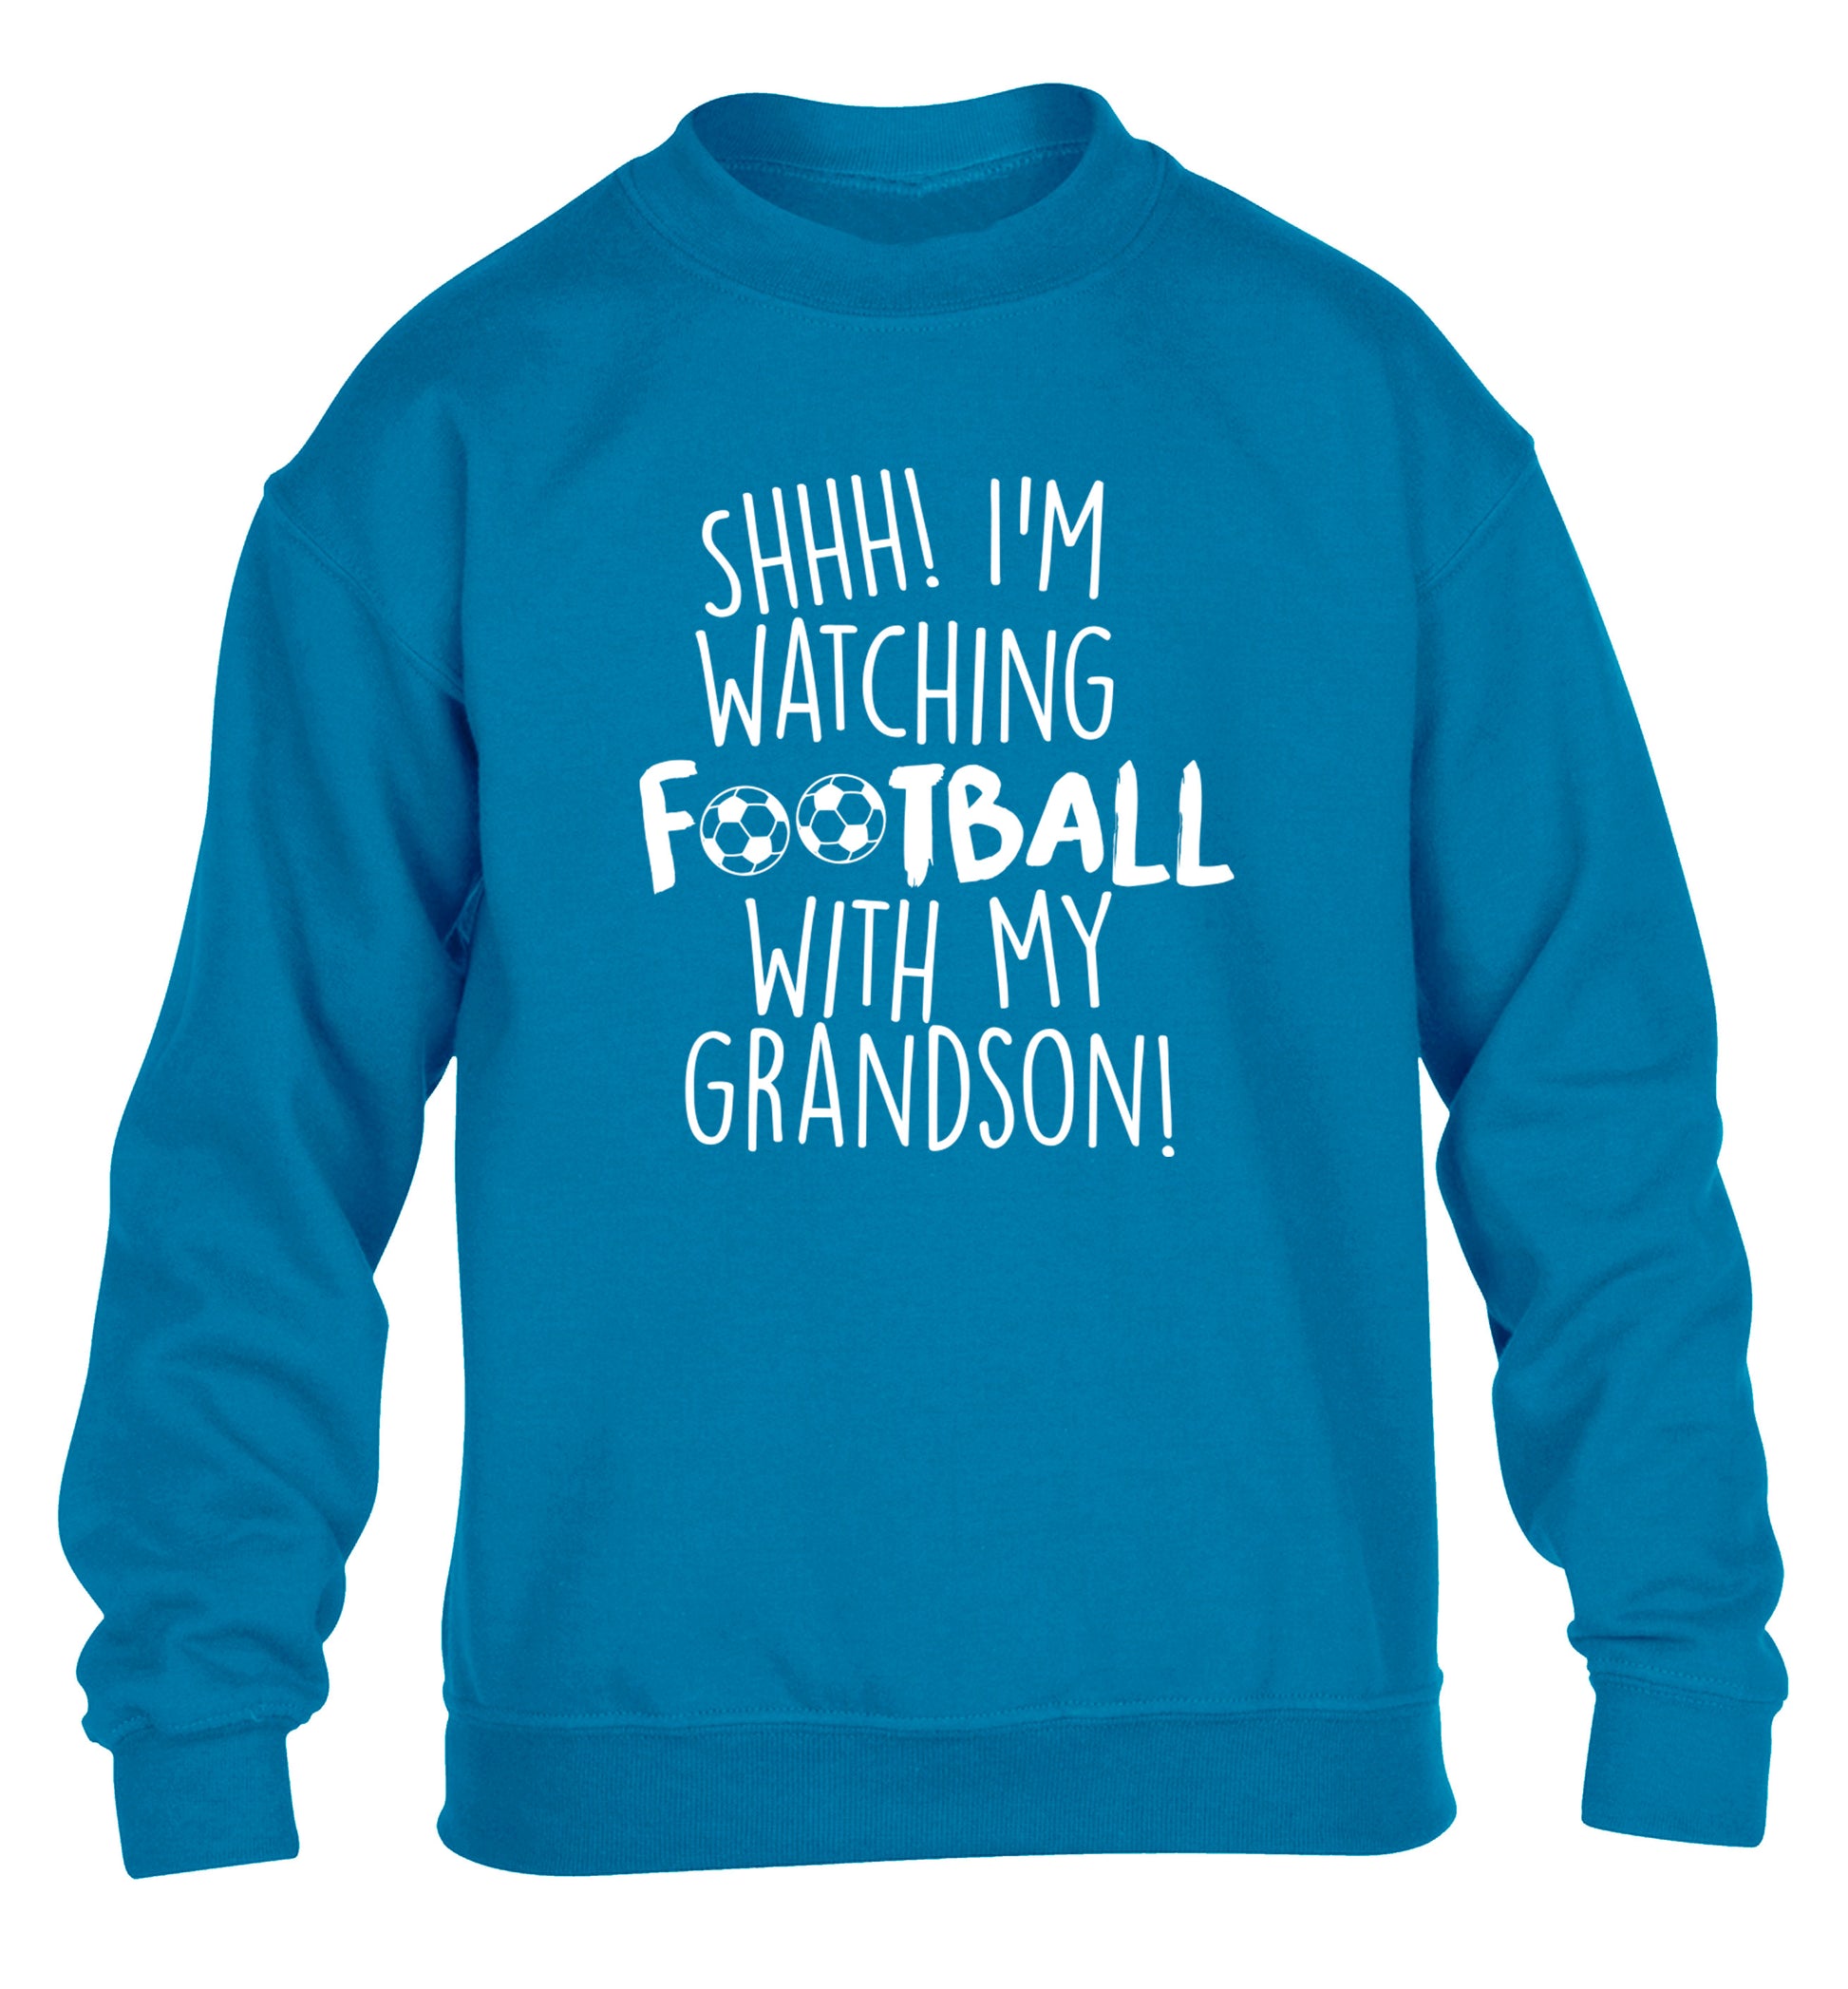 Shhh I'm watching football with my grandson children's blue sweater 12-14 Years